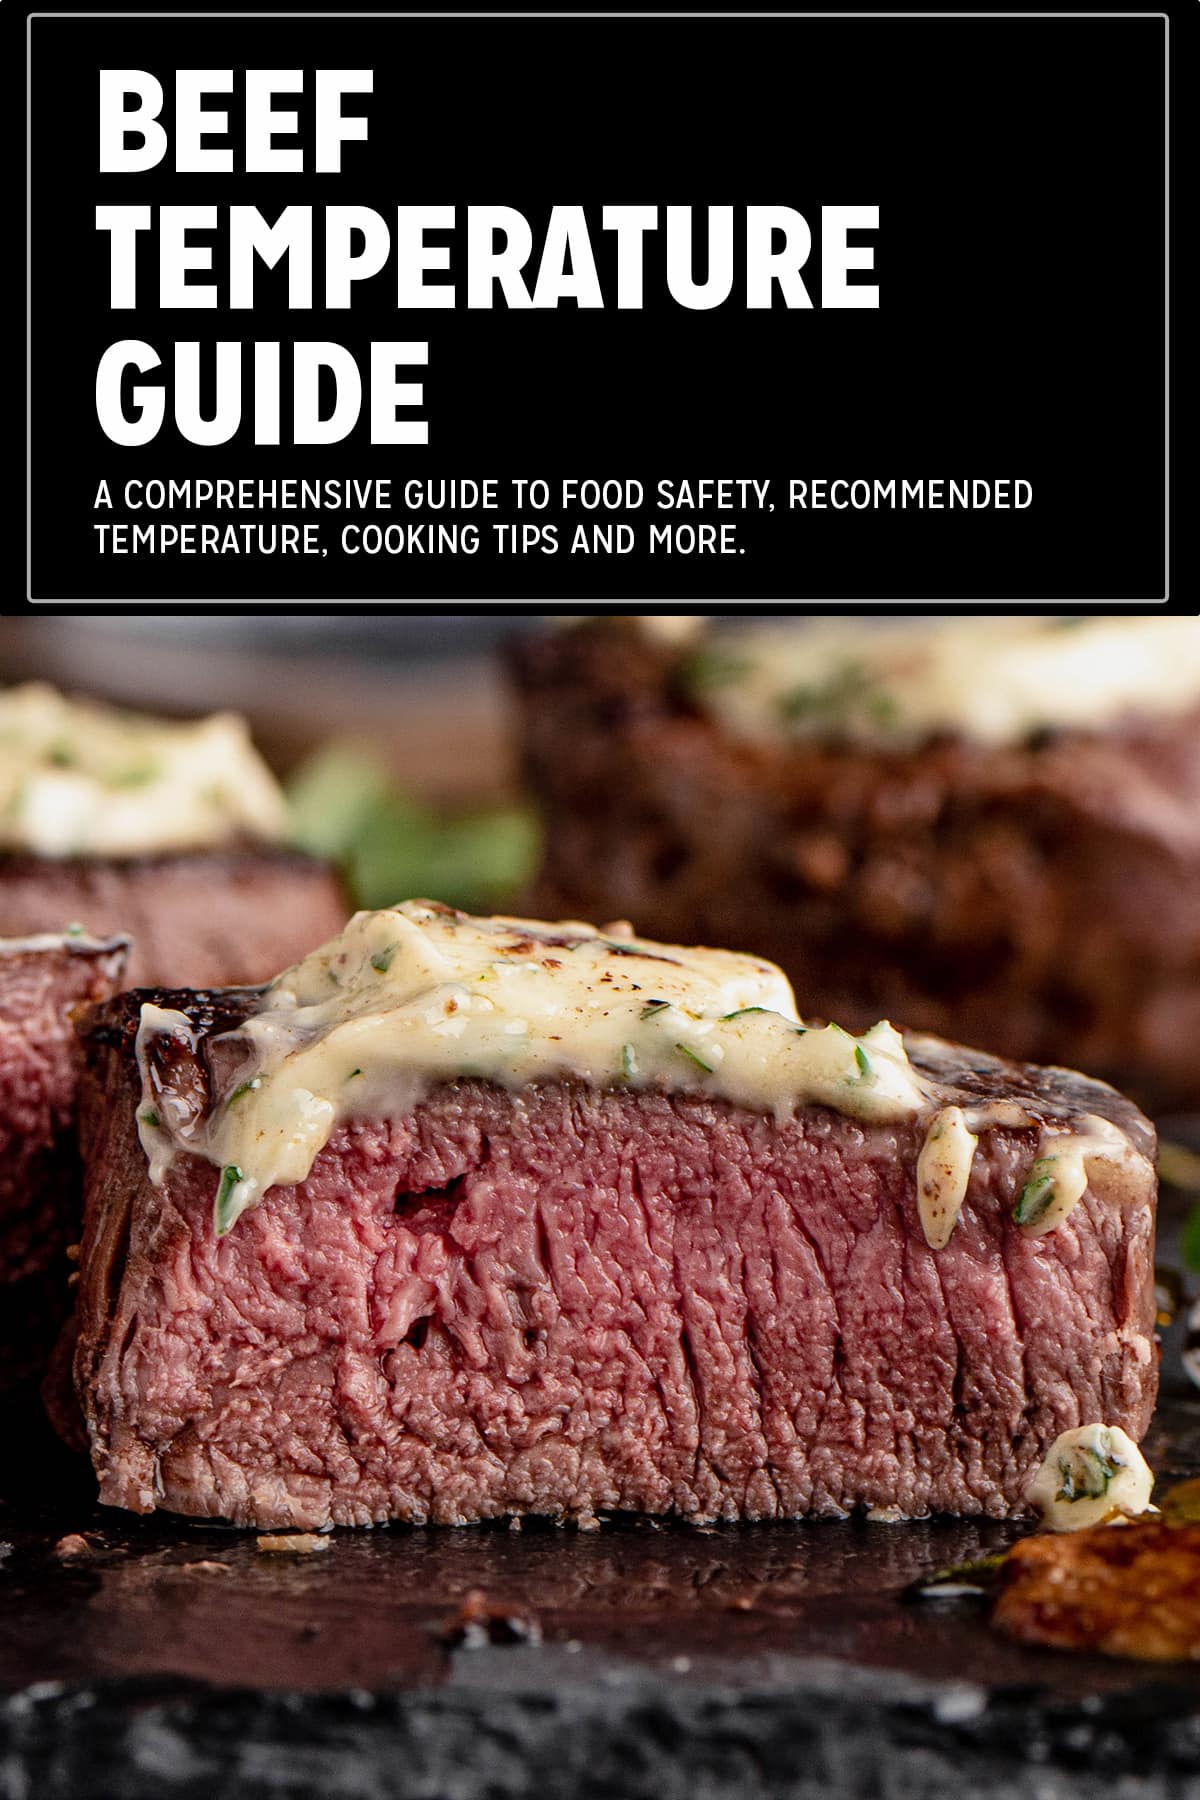 Quick meat cooking temperature guide. Let me know what to add or